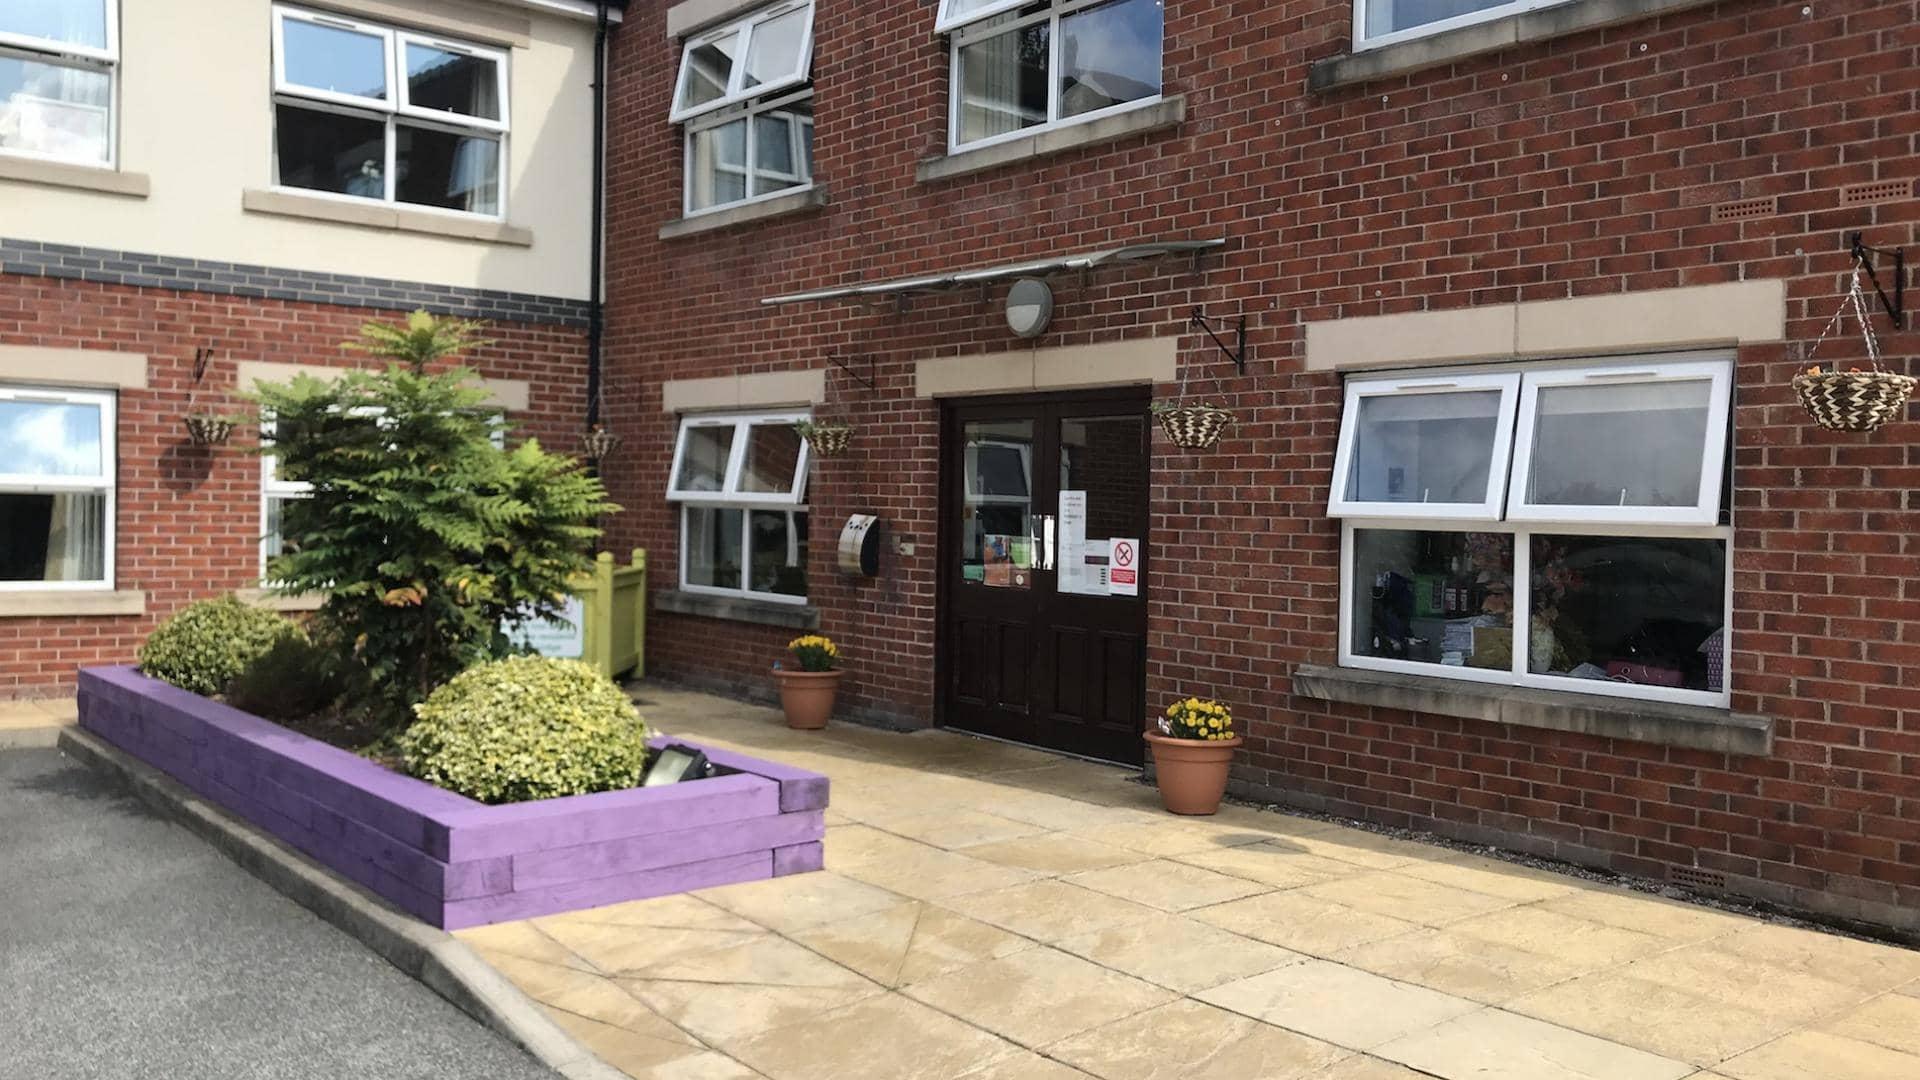 Nesfield Lodge care home front entrance